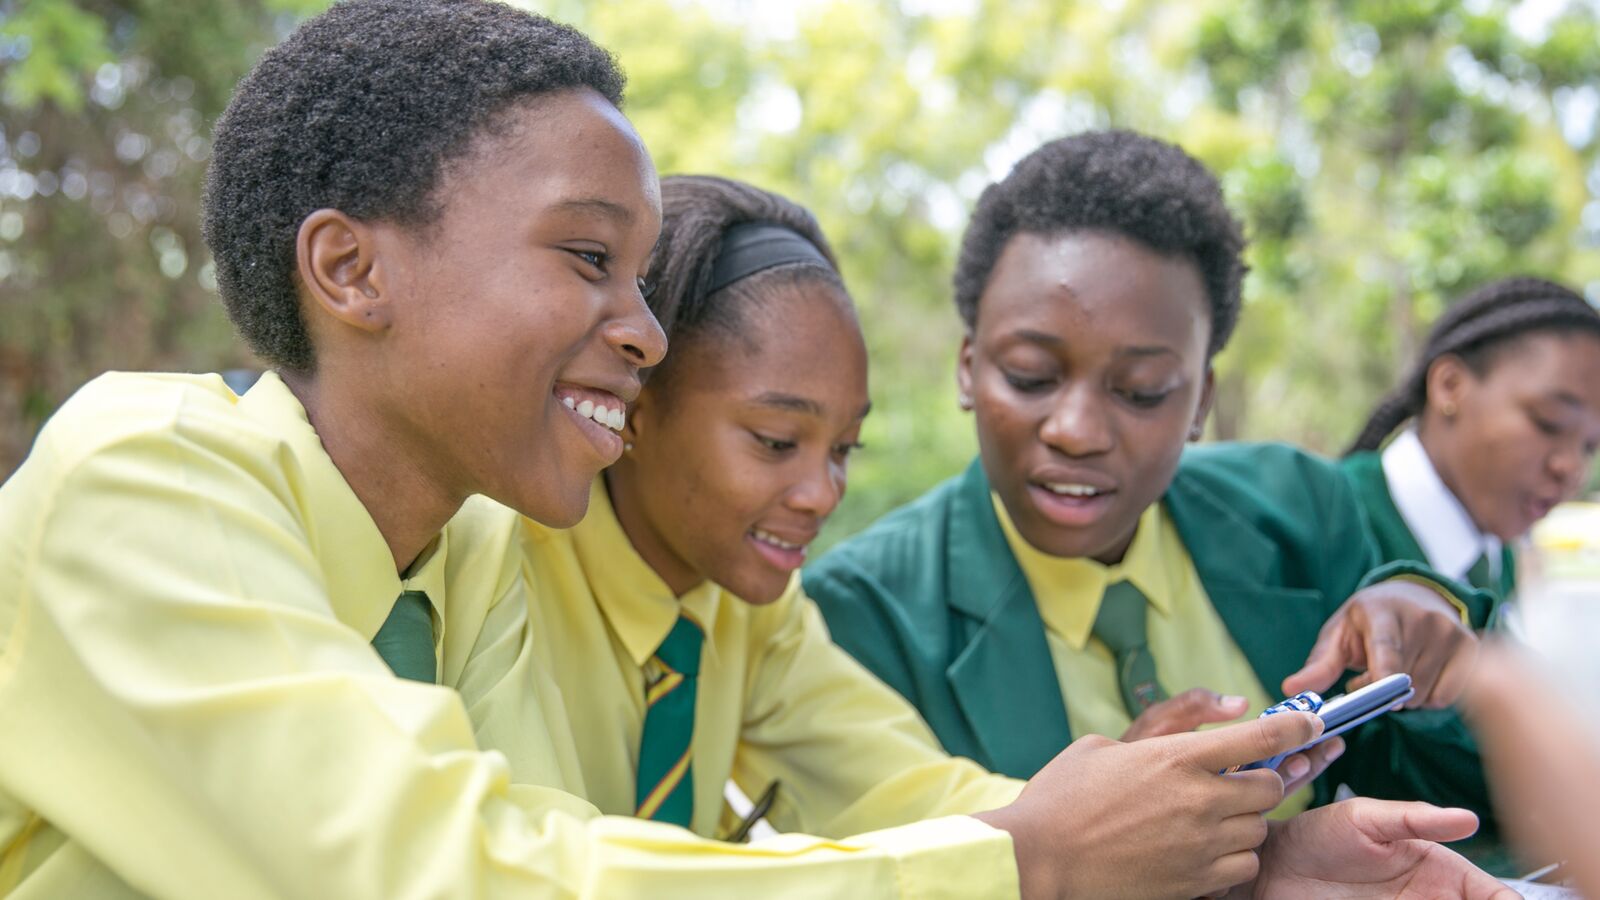 Three South African students work on Siyuvula math assignments using a phone